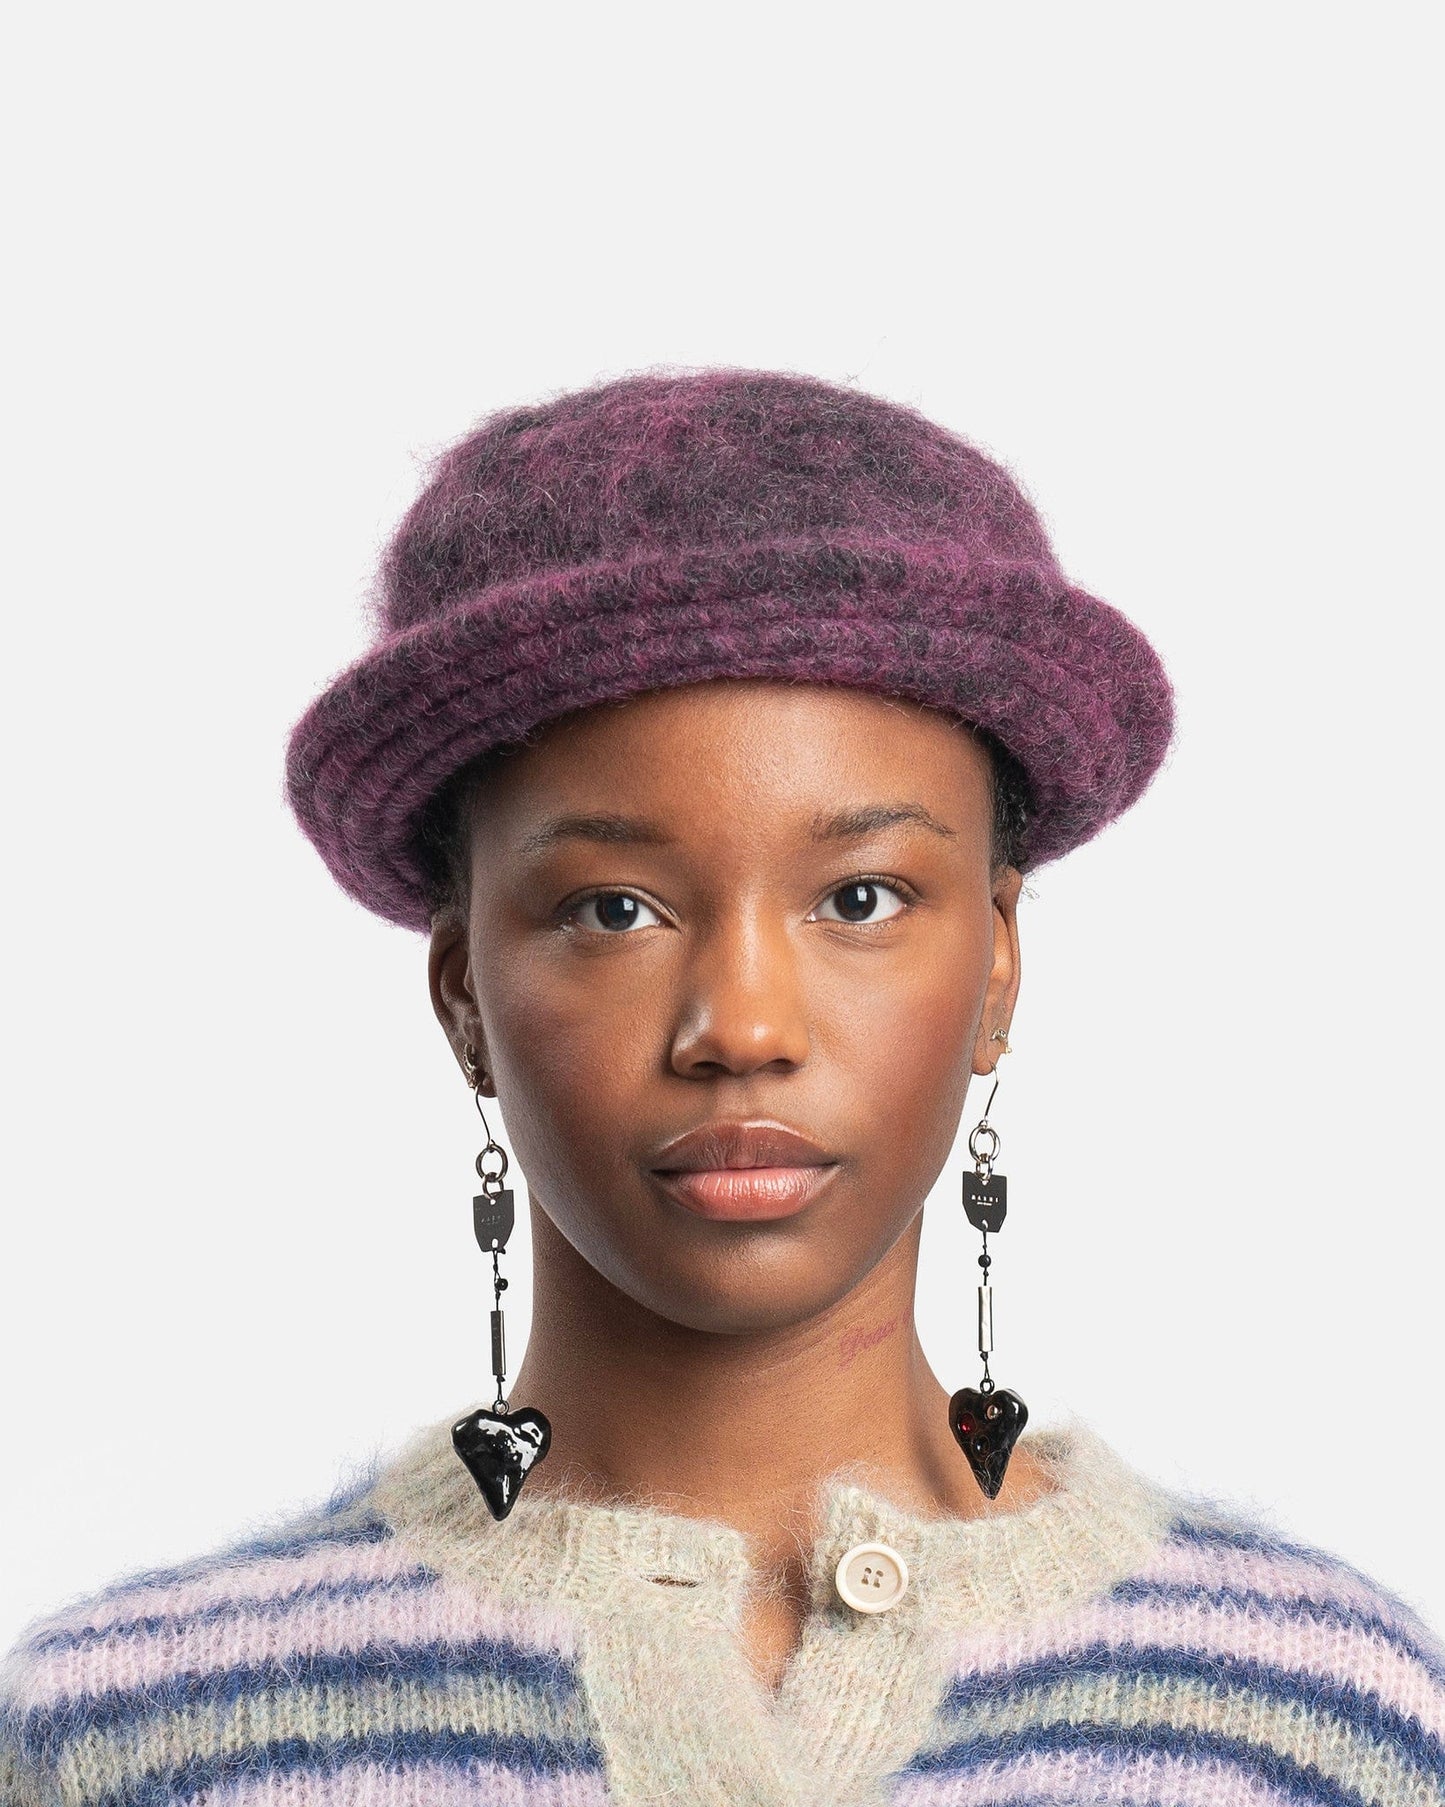 Marni Women's Hats Brushed Wool Check Hat in Dry Rose